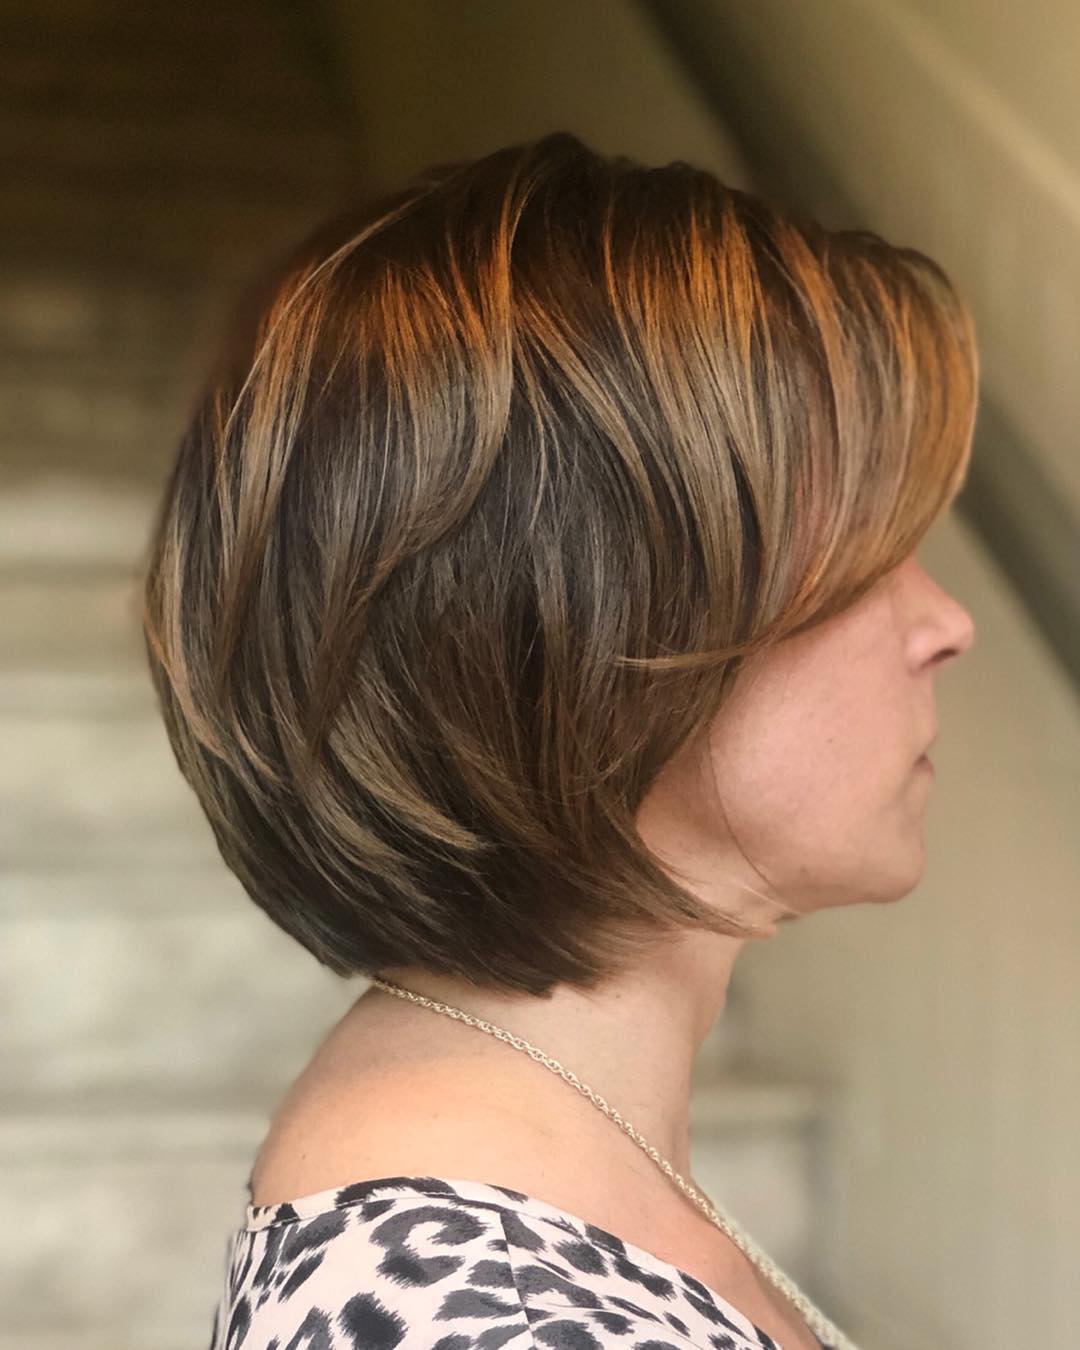 Youthful hairstyles for over 50s: 65+ flattering hair ideas | Woman & Home